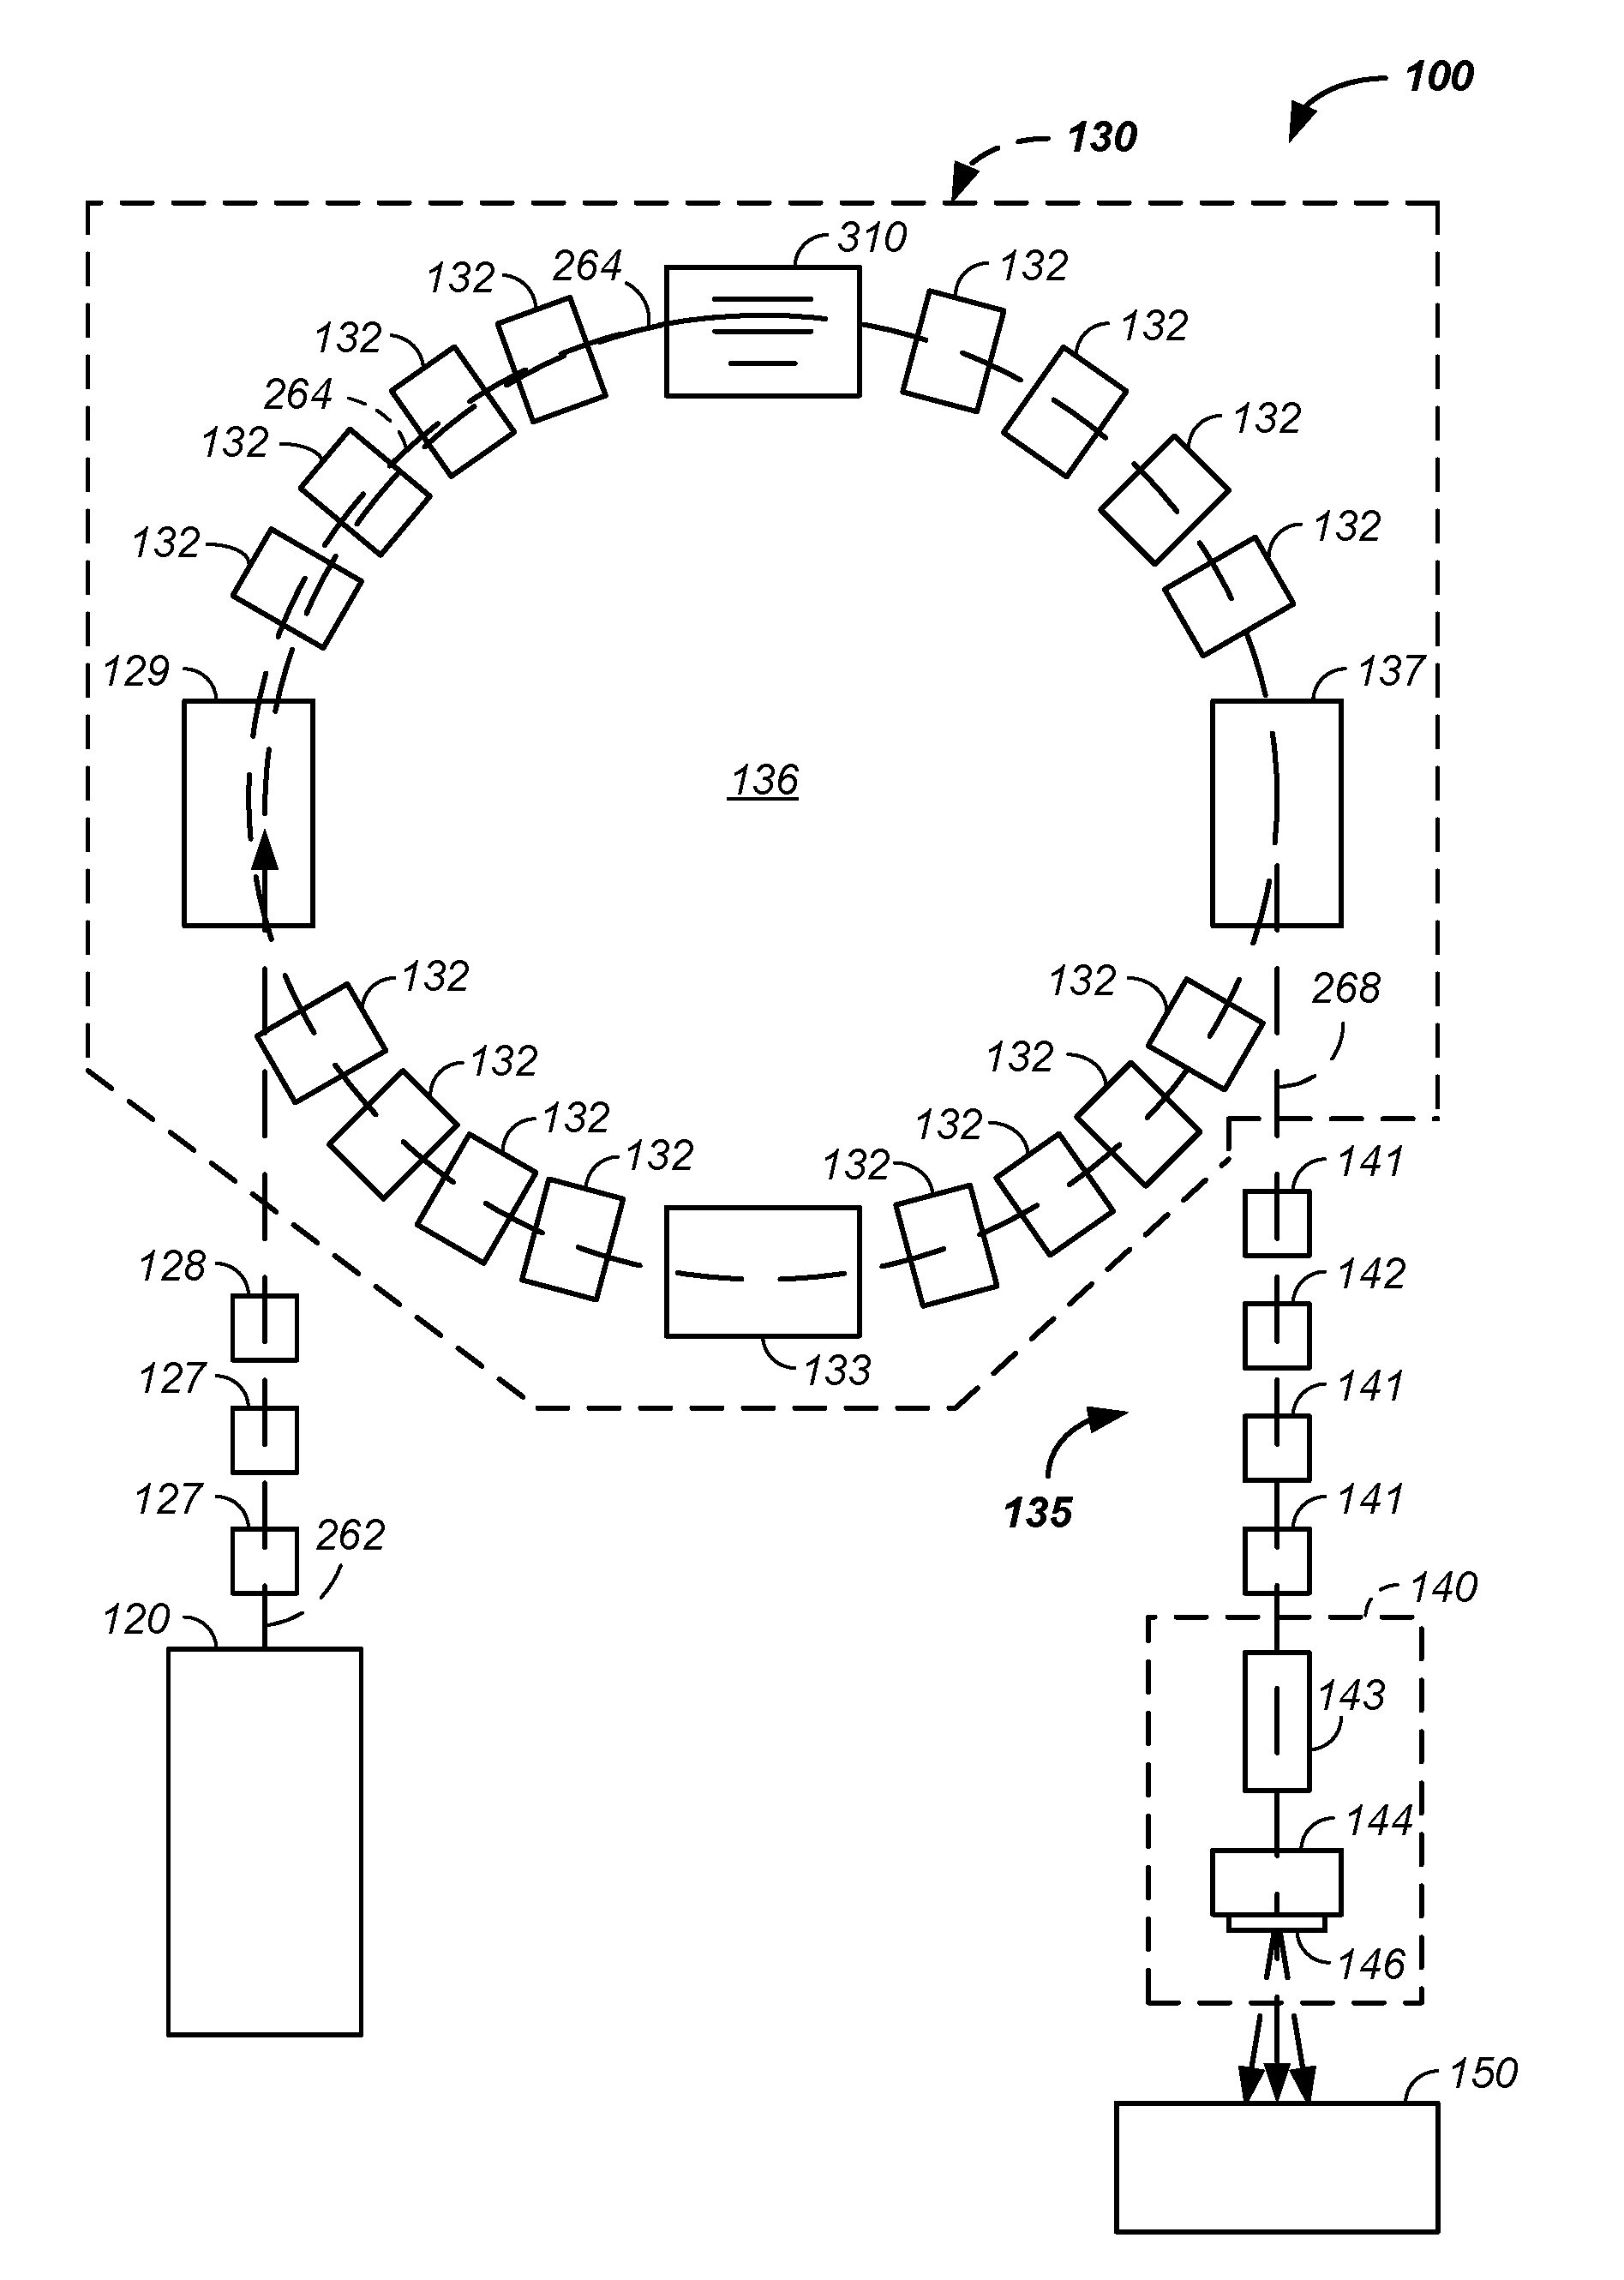 Guided charged particle imaging/treatment apparatus and method of use thereof